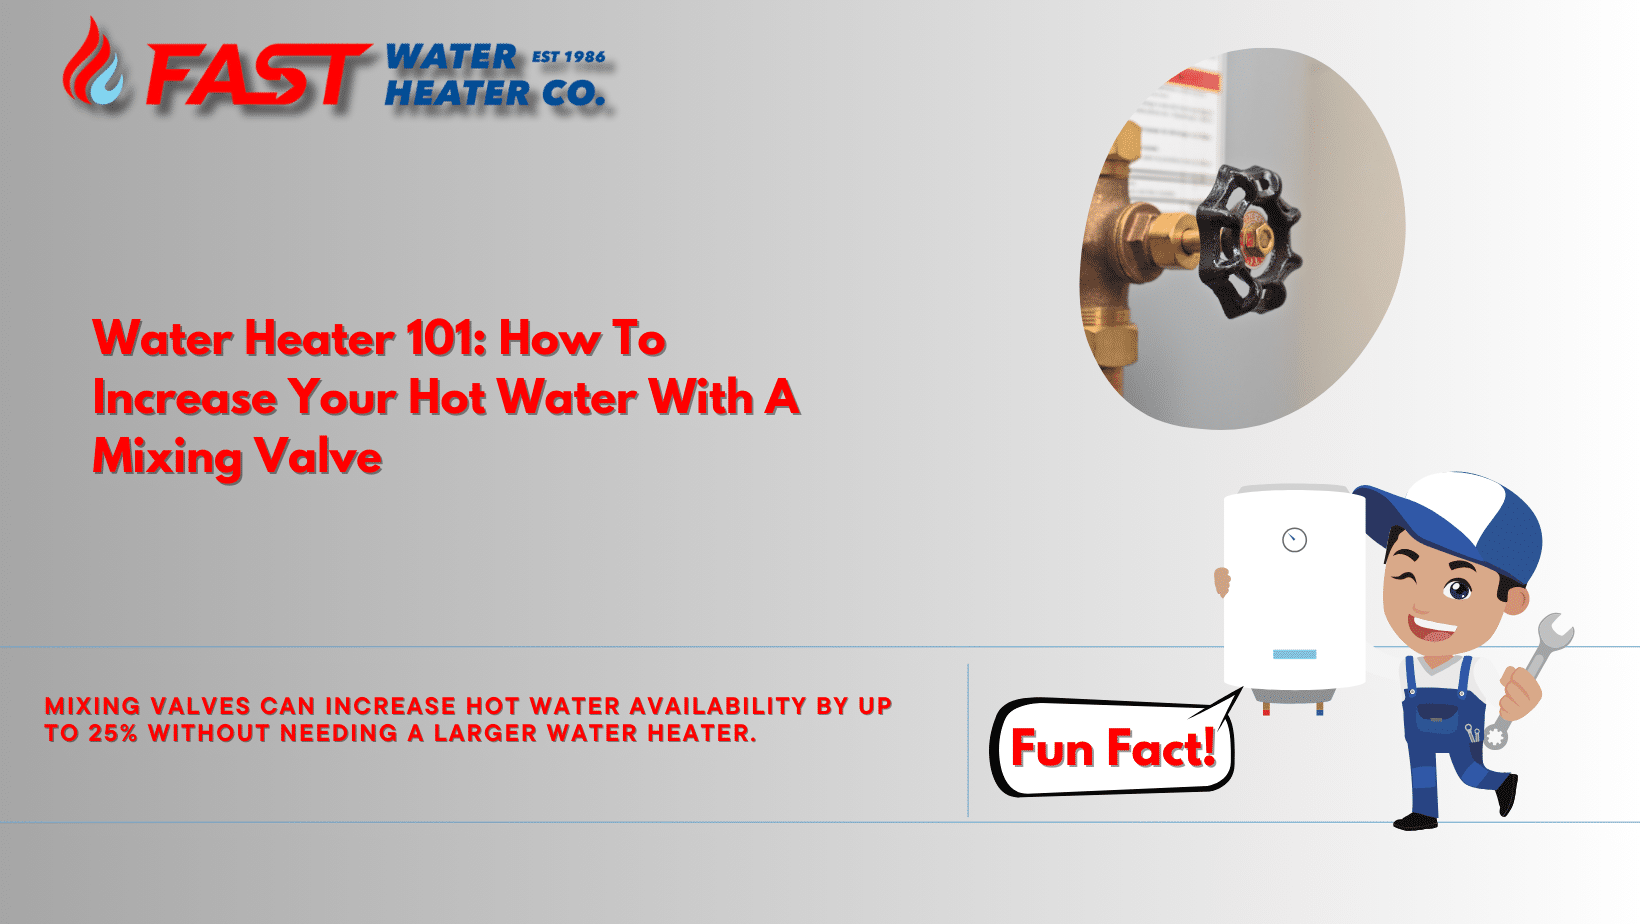 How To Increase Your Hot Water With A Mixing Valve